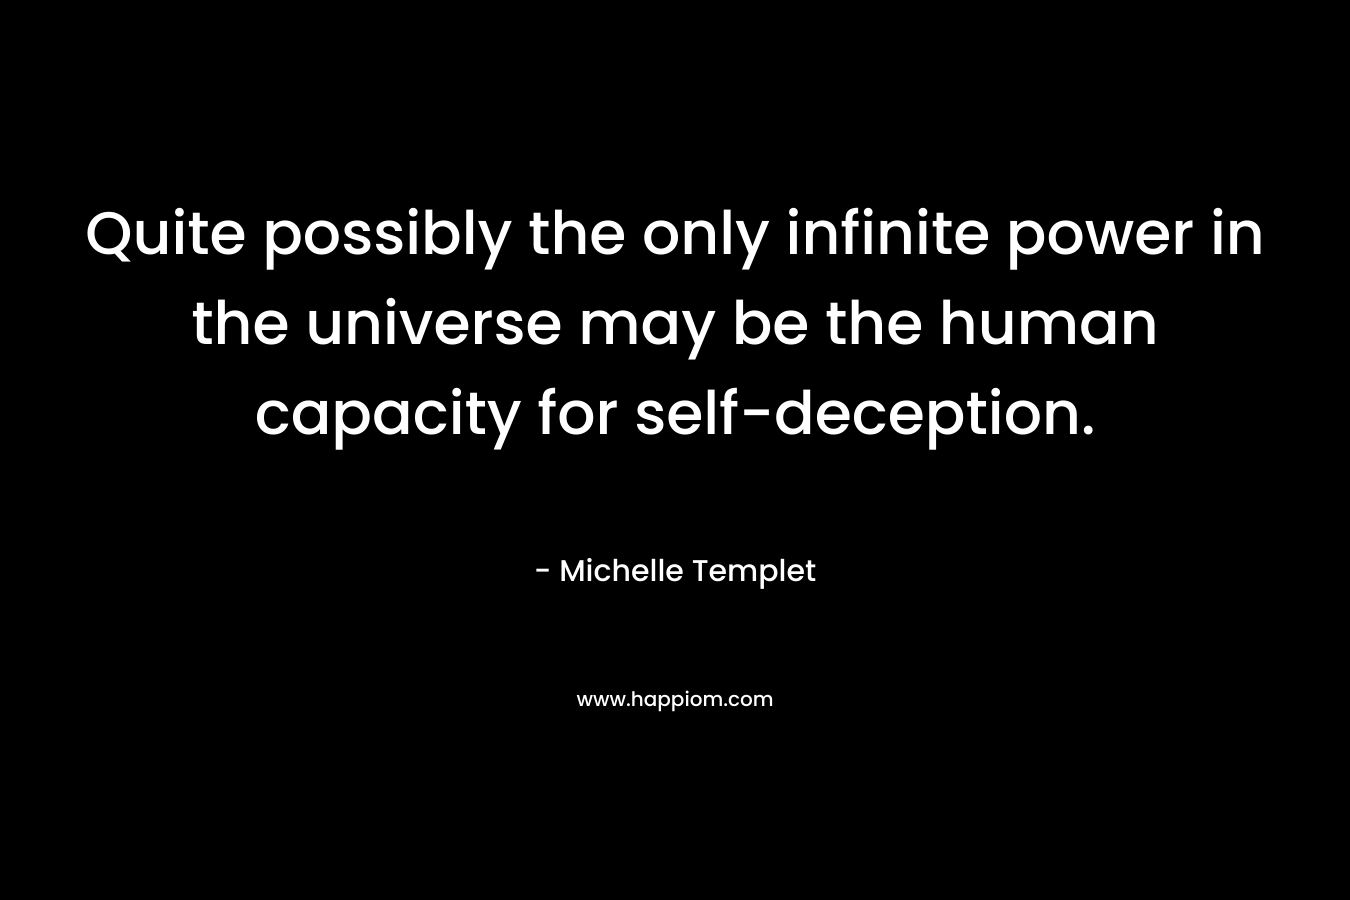 Quite possibly the only infinite power in the universe may be the human capacity for self-deception.